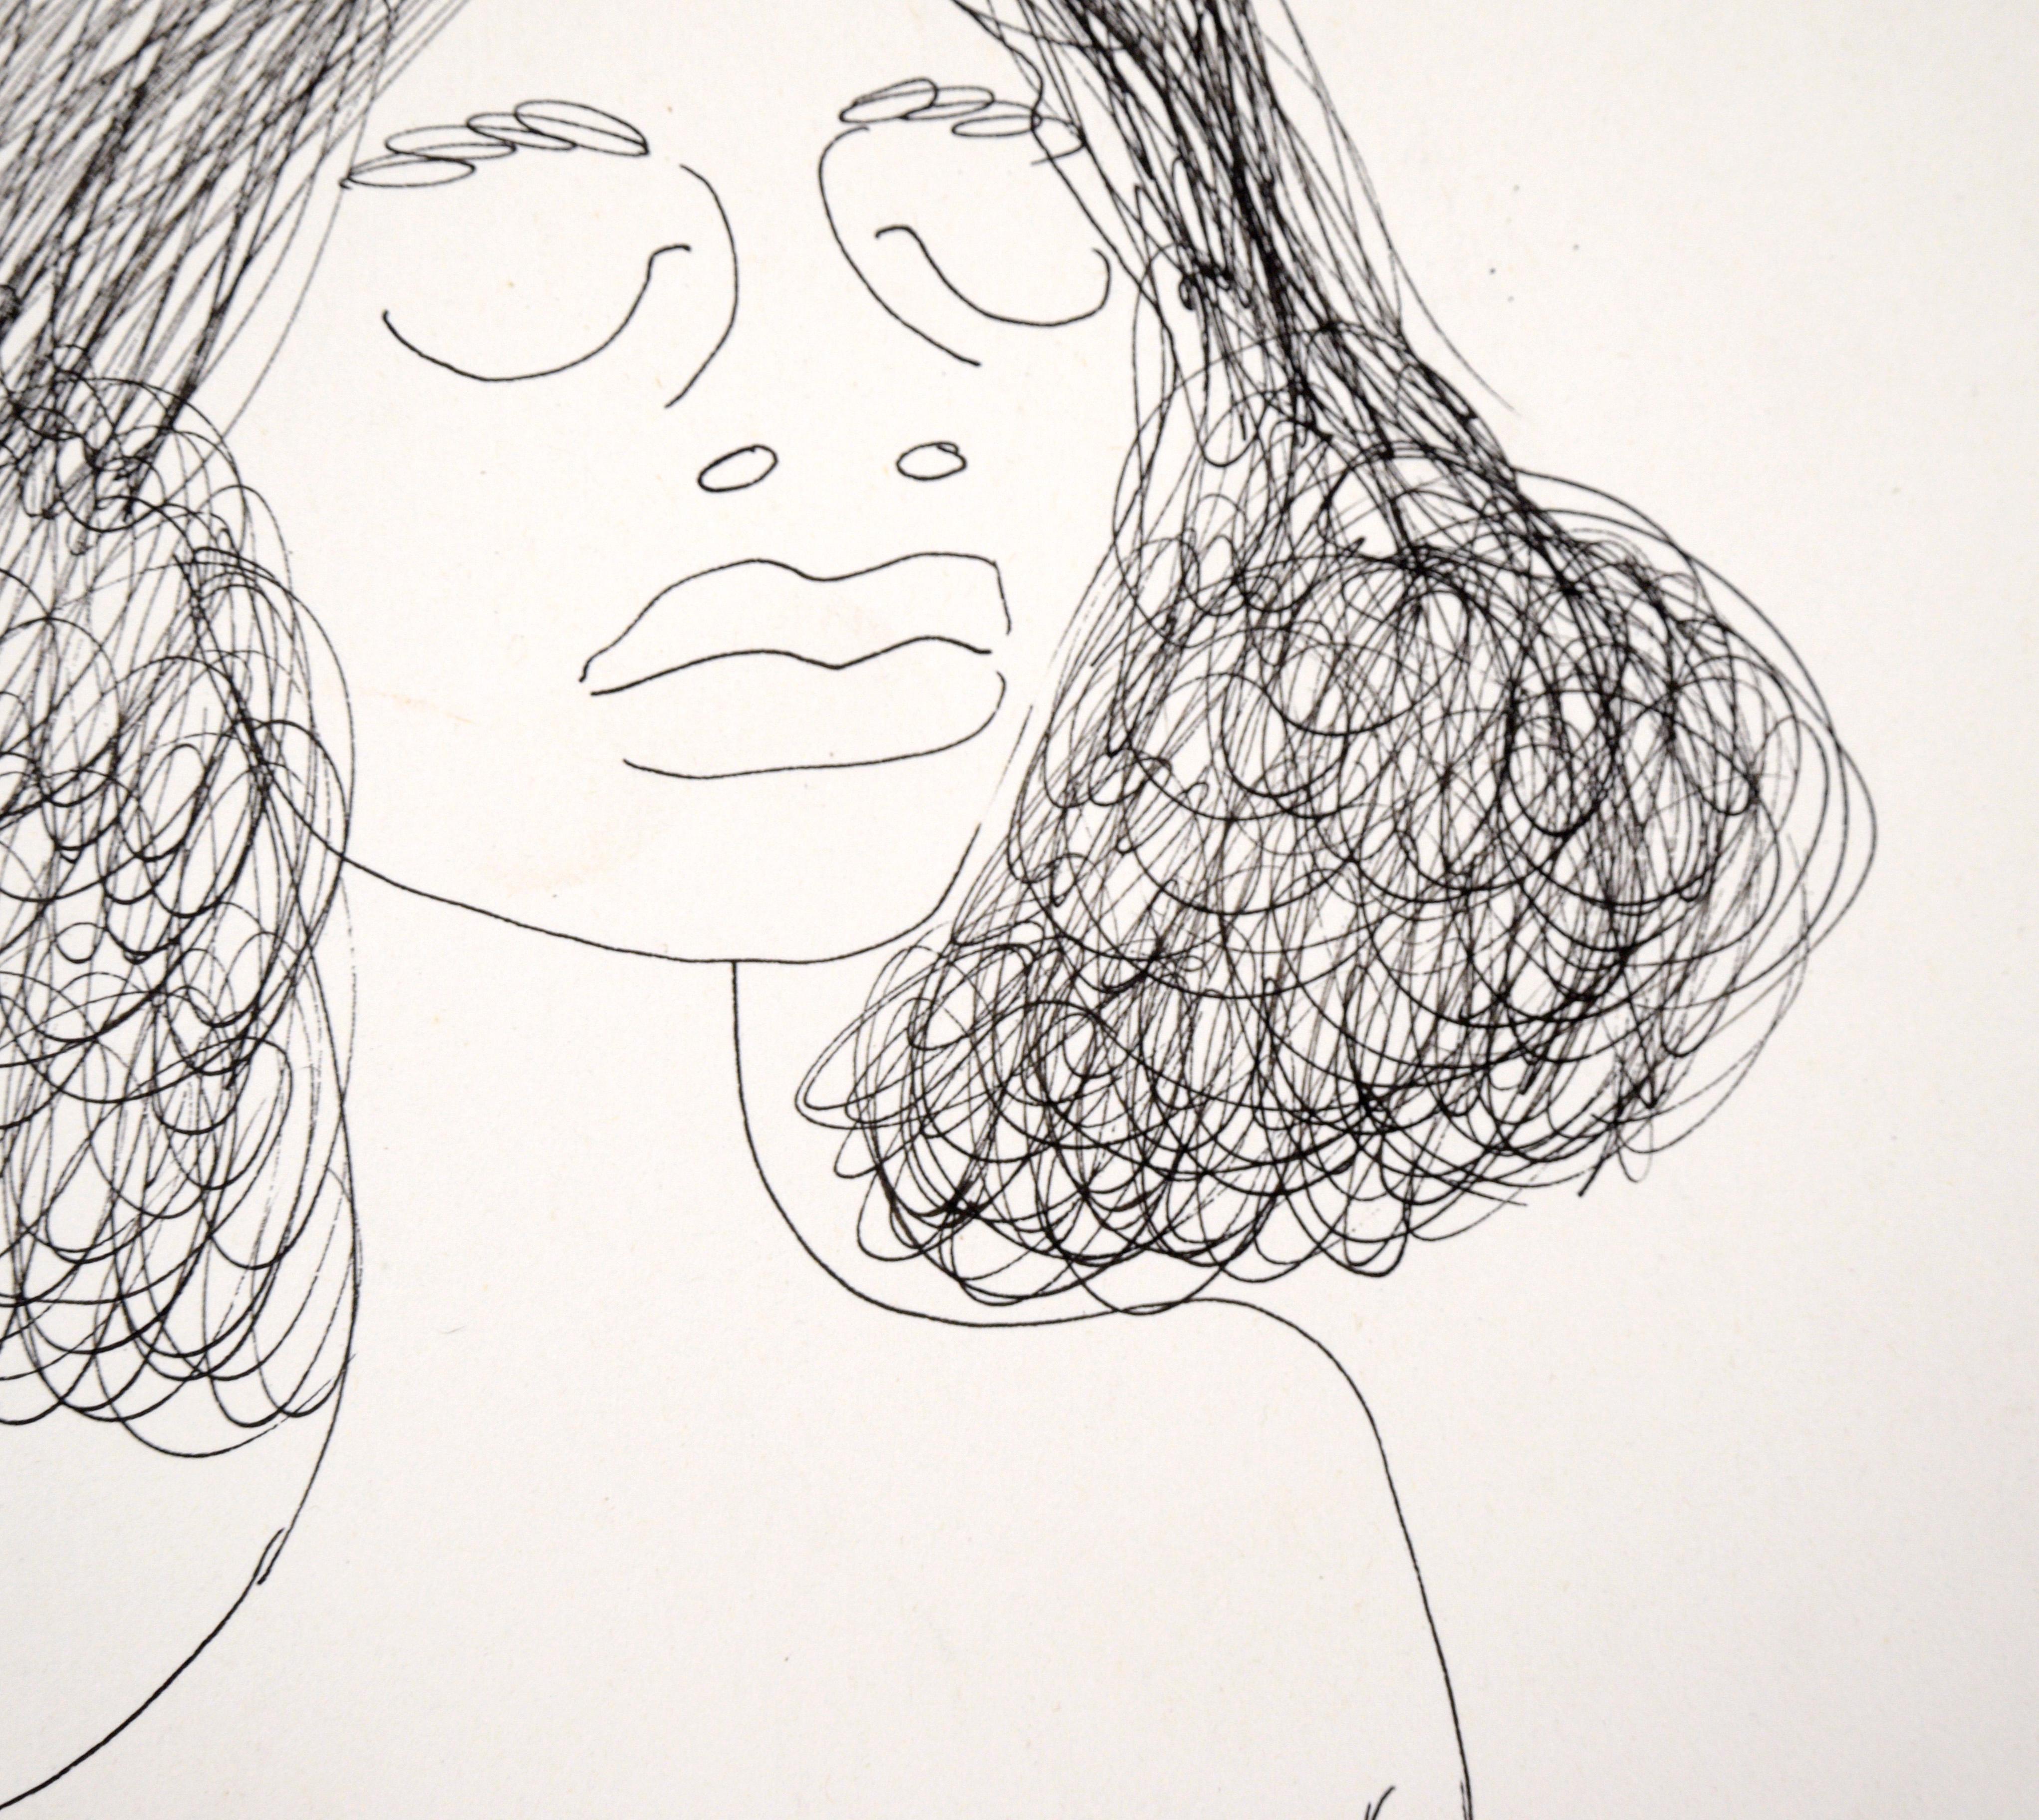 Nude Portrait of a Woman with Curly Hair - Drawing in Pen on Paper

Stylized drawing by unknown artist 